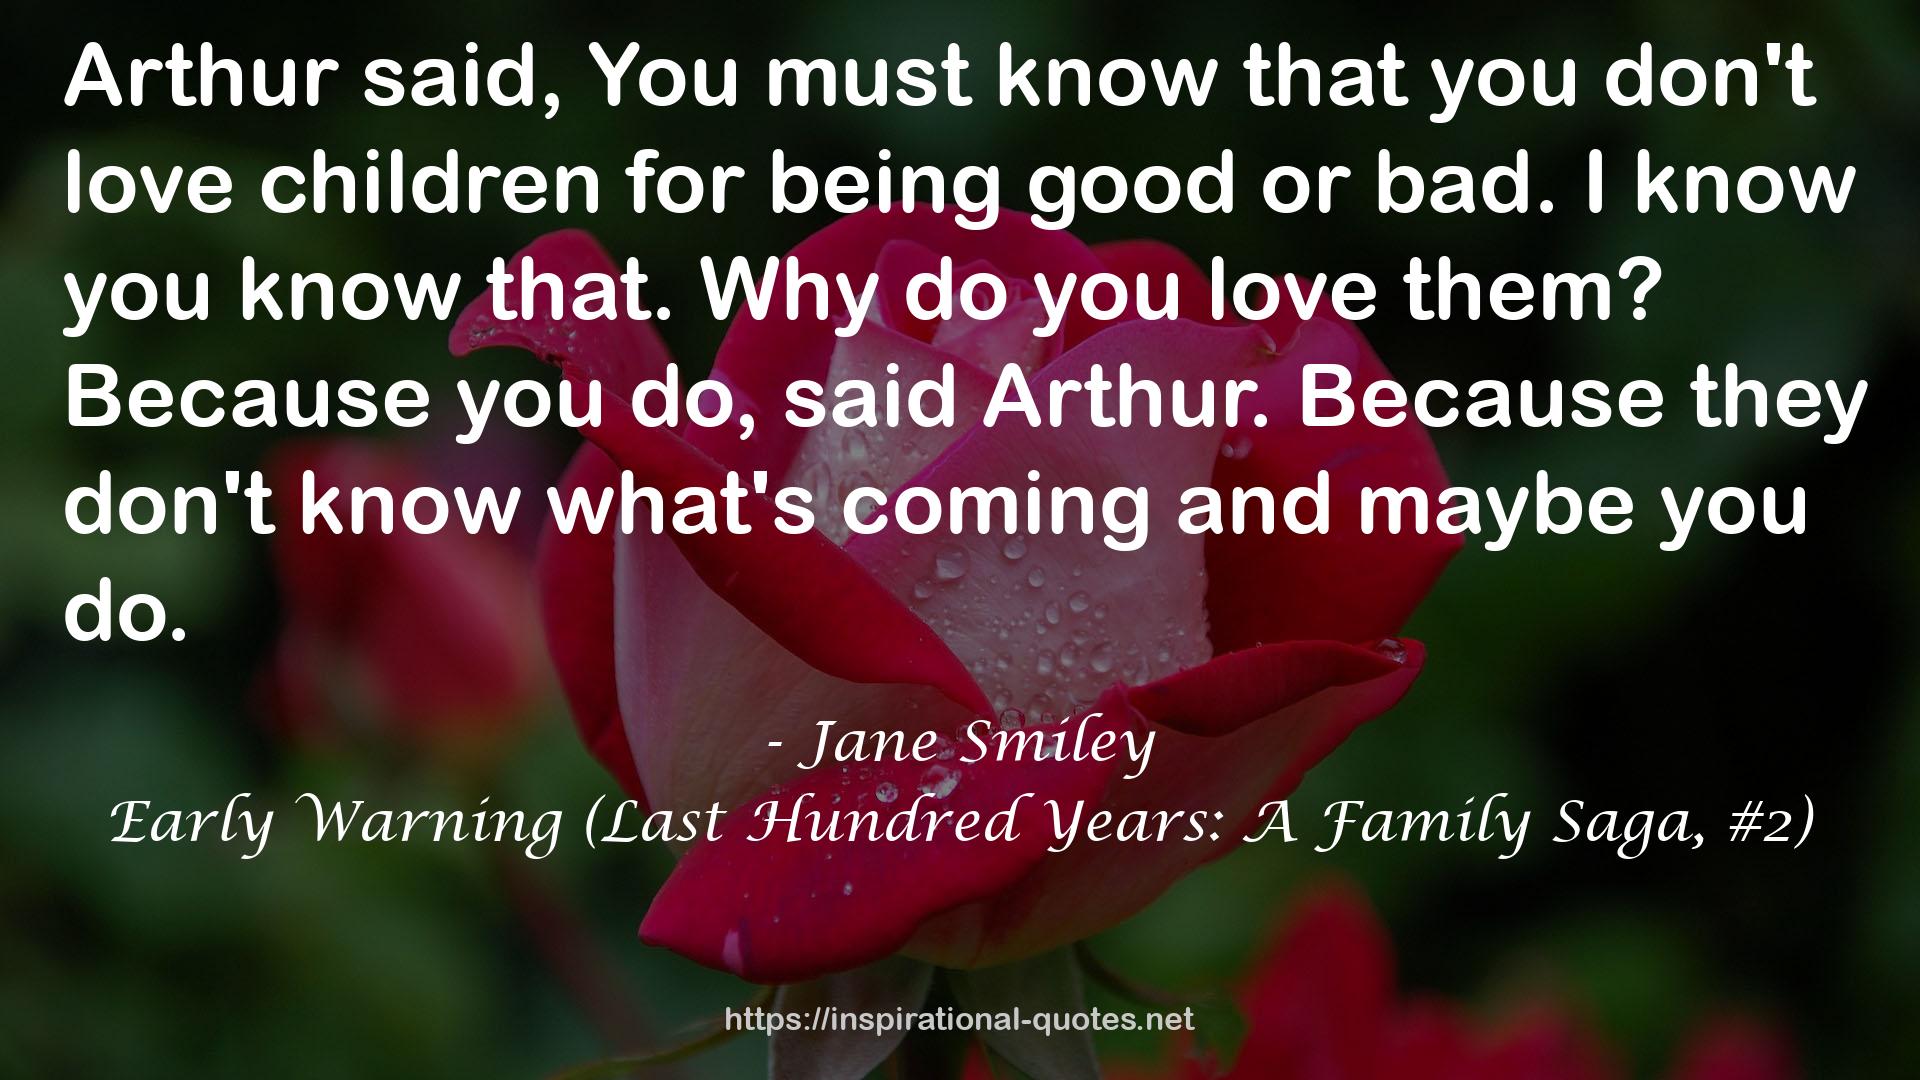 Early Warning (Last Hundred Years: A Family Saga, #2) QUOTES